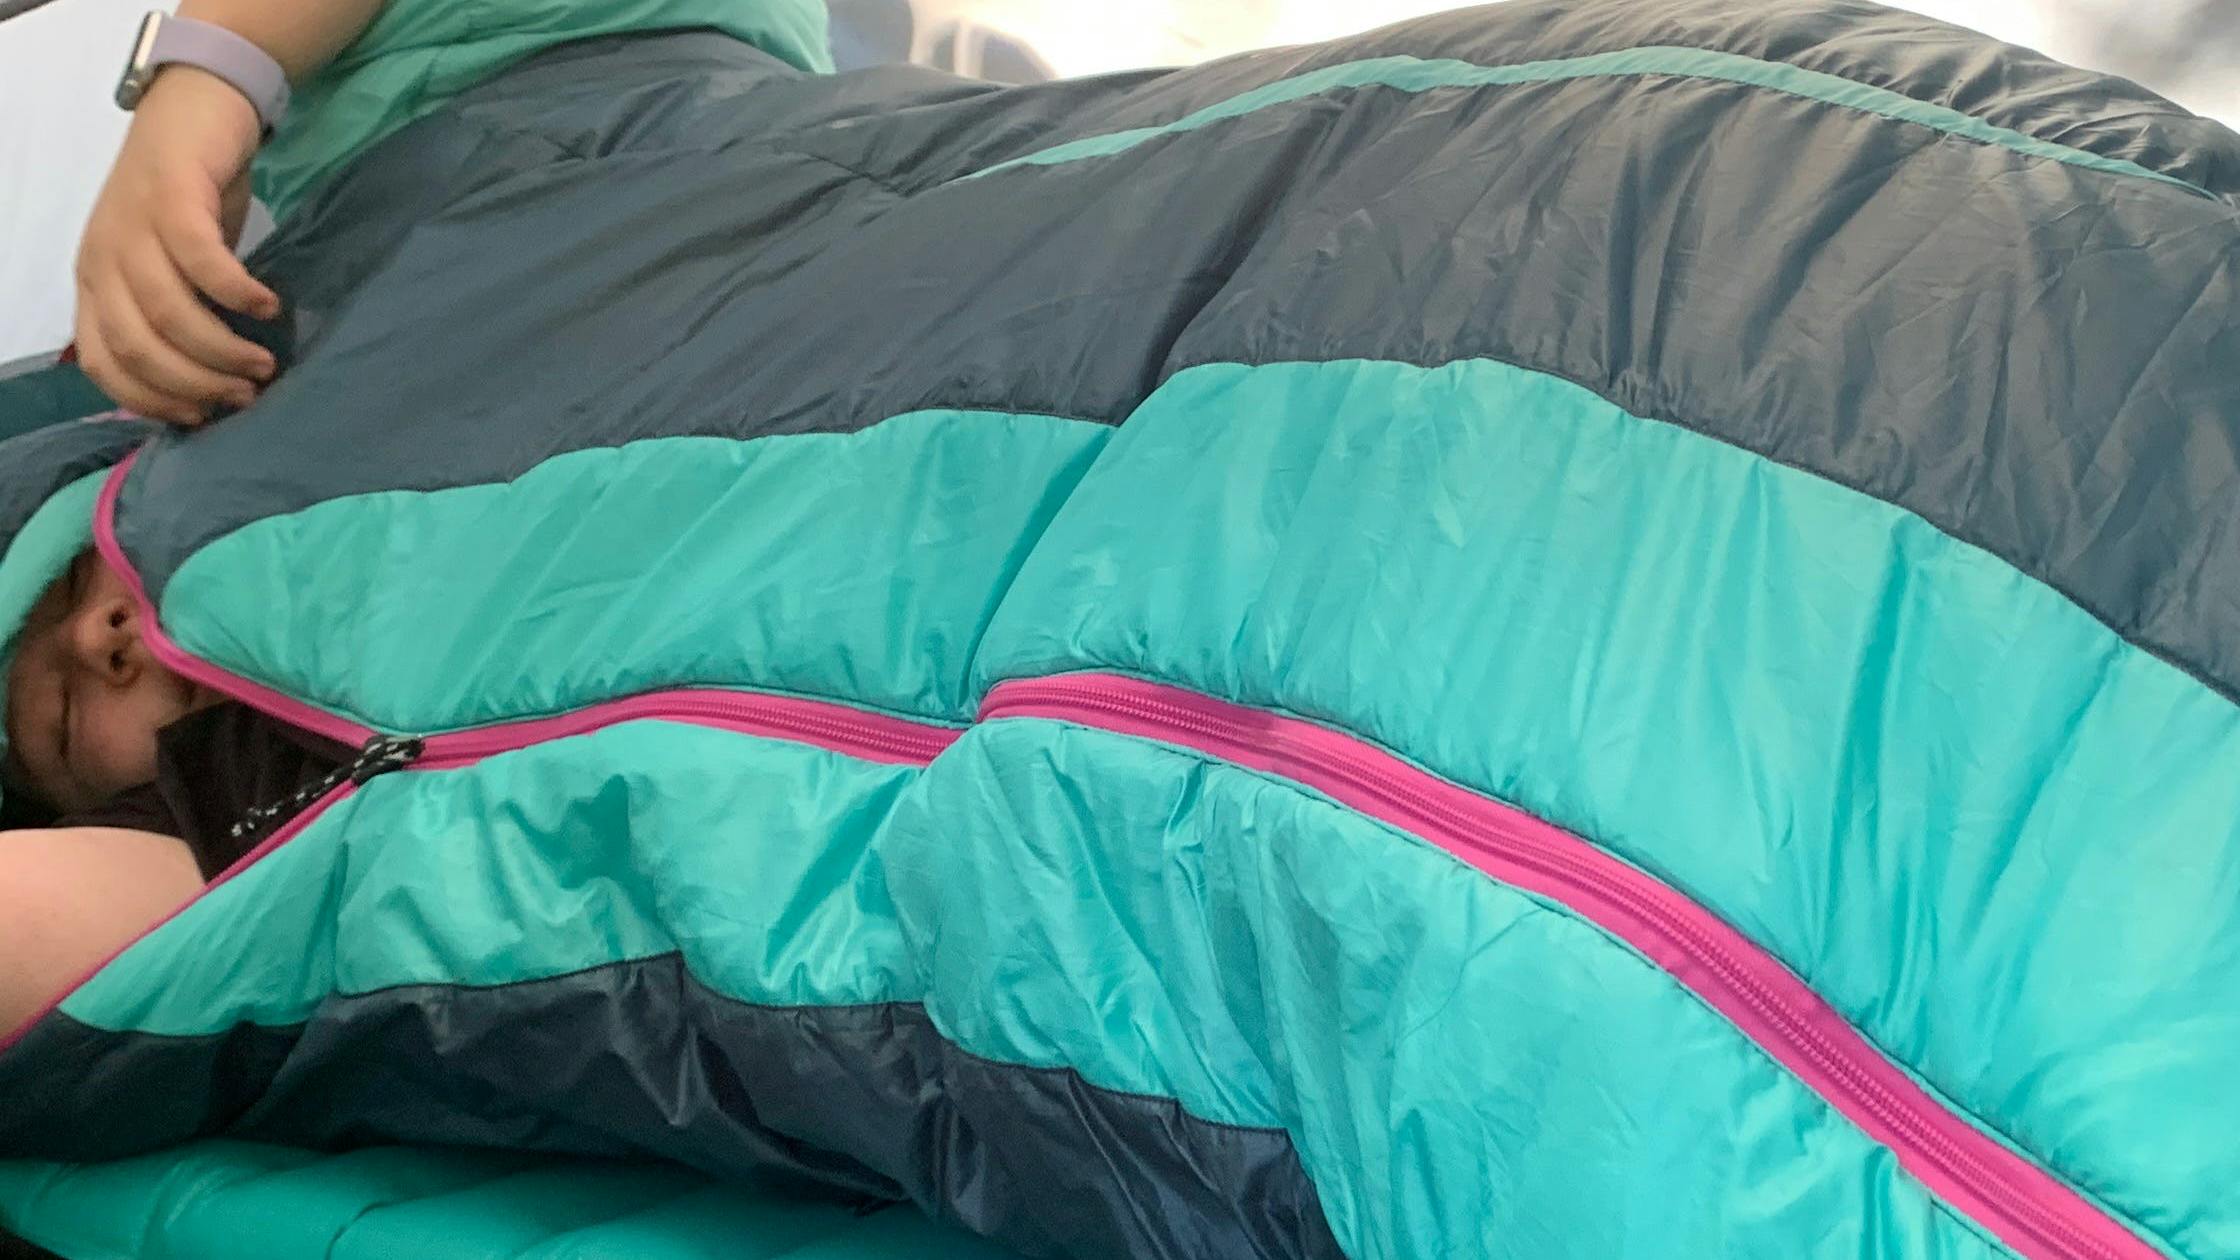 A woman in a tent in the Nemo Forte 35 Sleeping Bag.